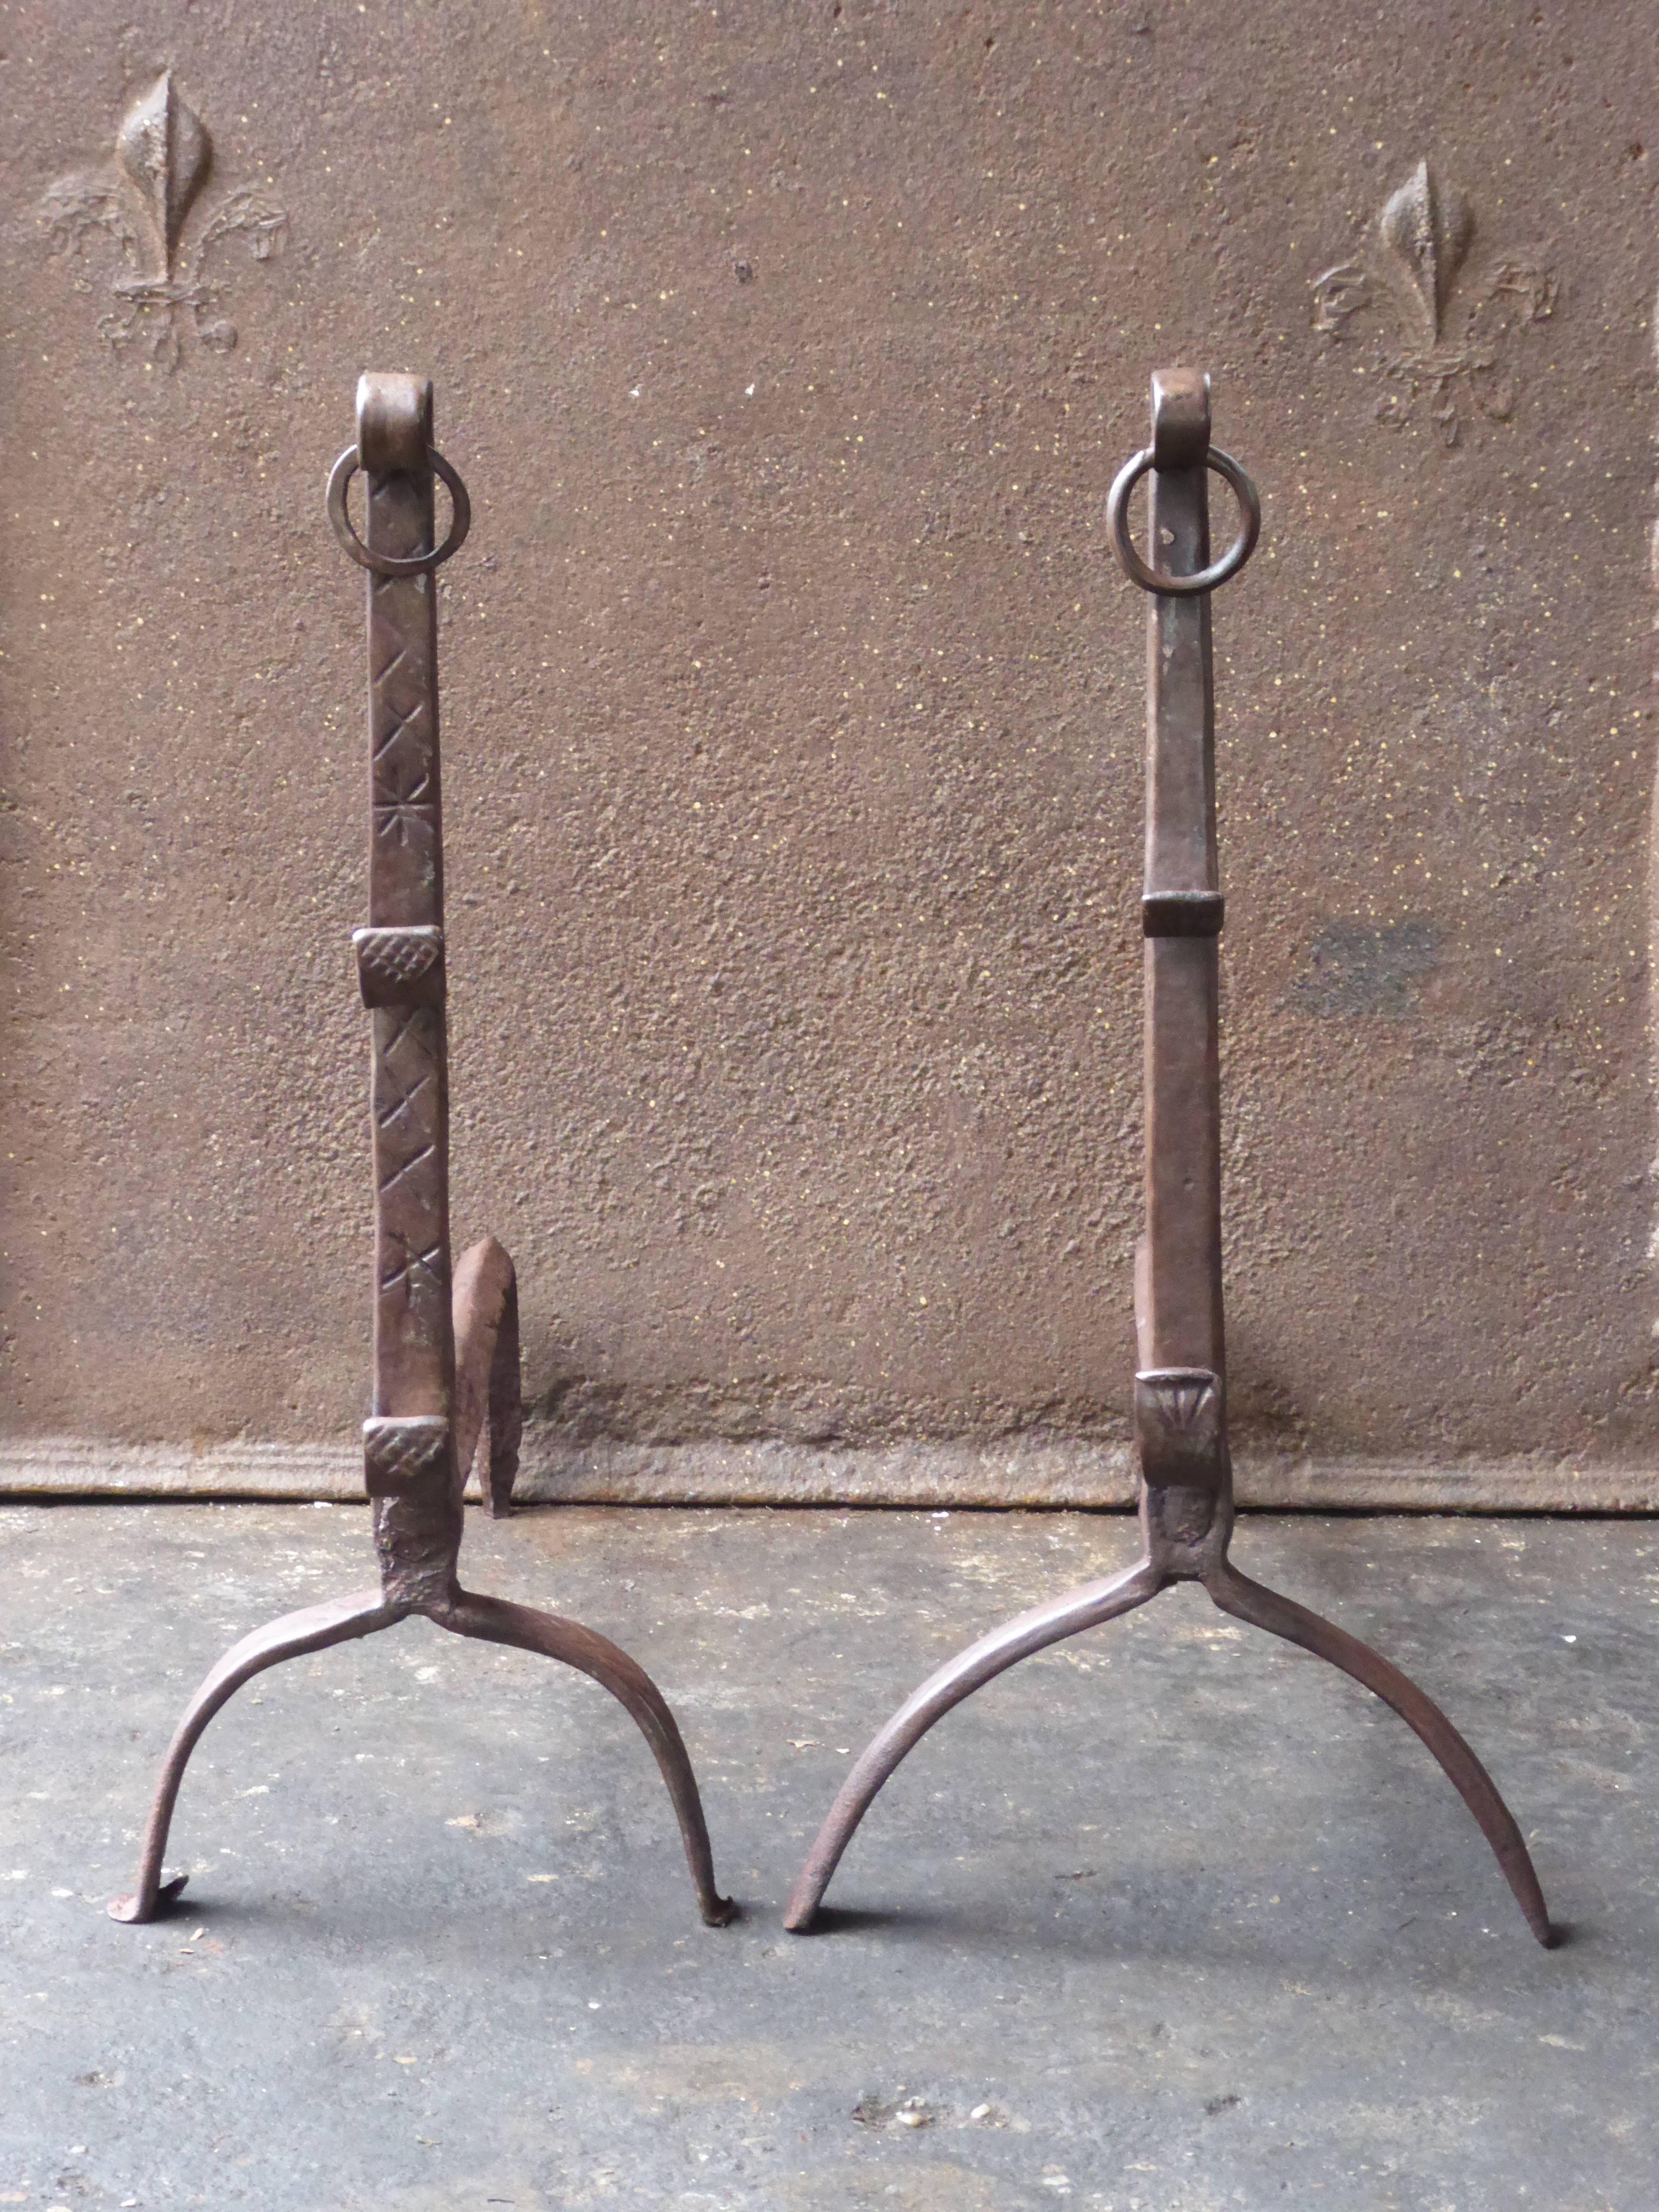 17th century French Gothic andirons made of wrought iron. The andirons are in a good condition and are fit for use in the fireplace.

